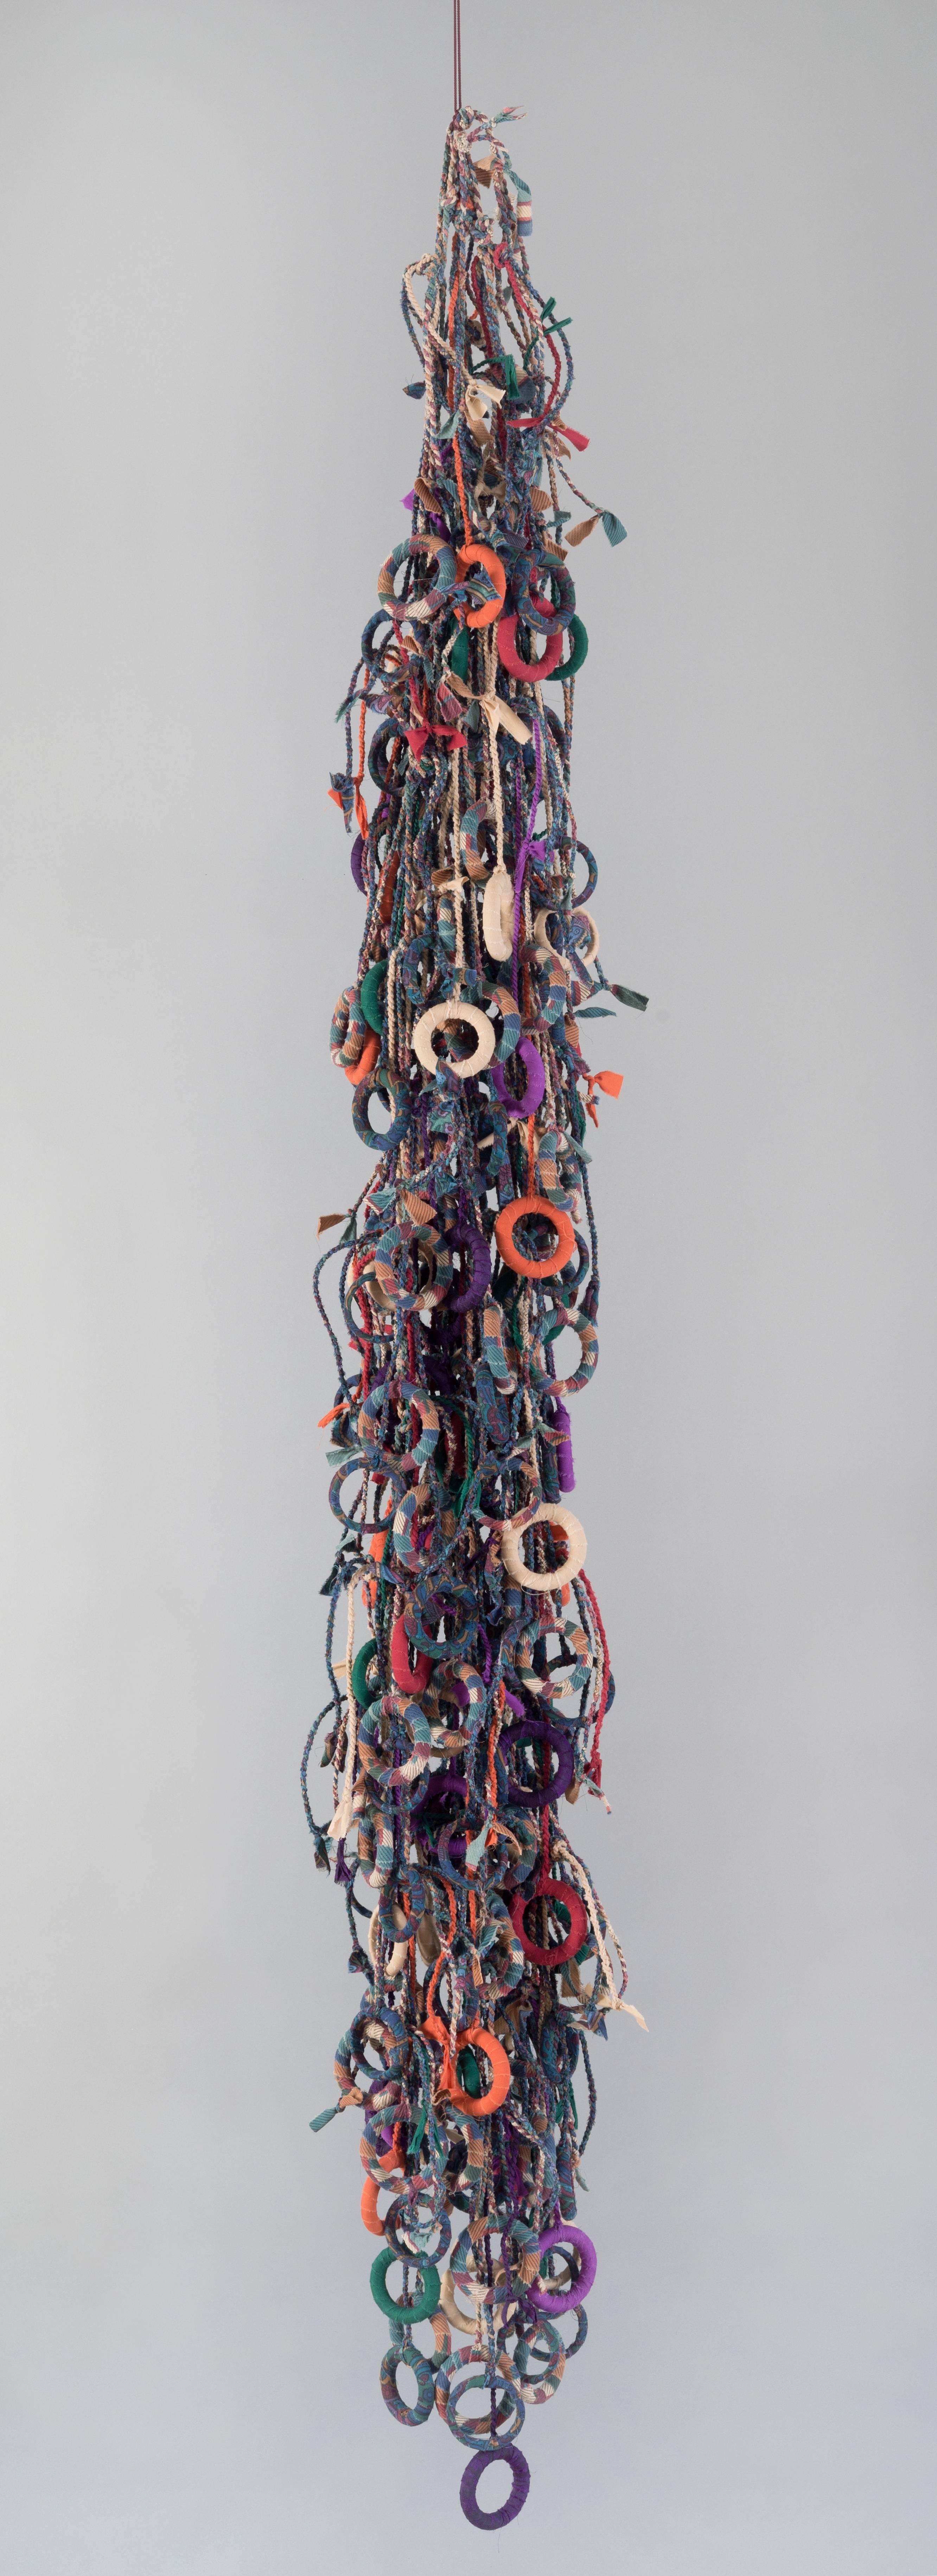 Contemporary Mixed Media Wall Sculpture with Wood, Plastic, Fiber, and Chord